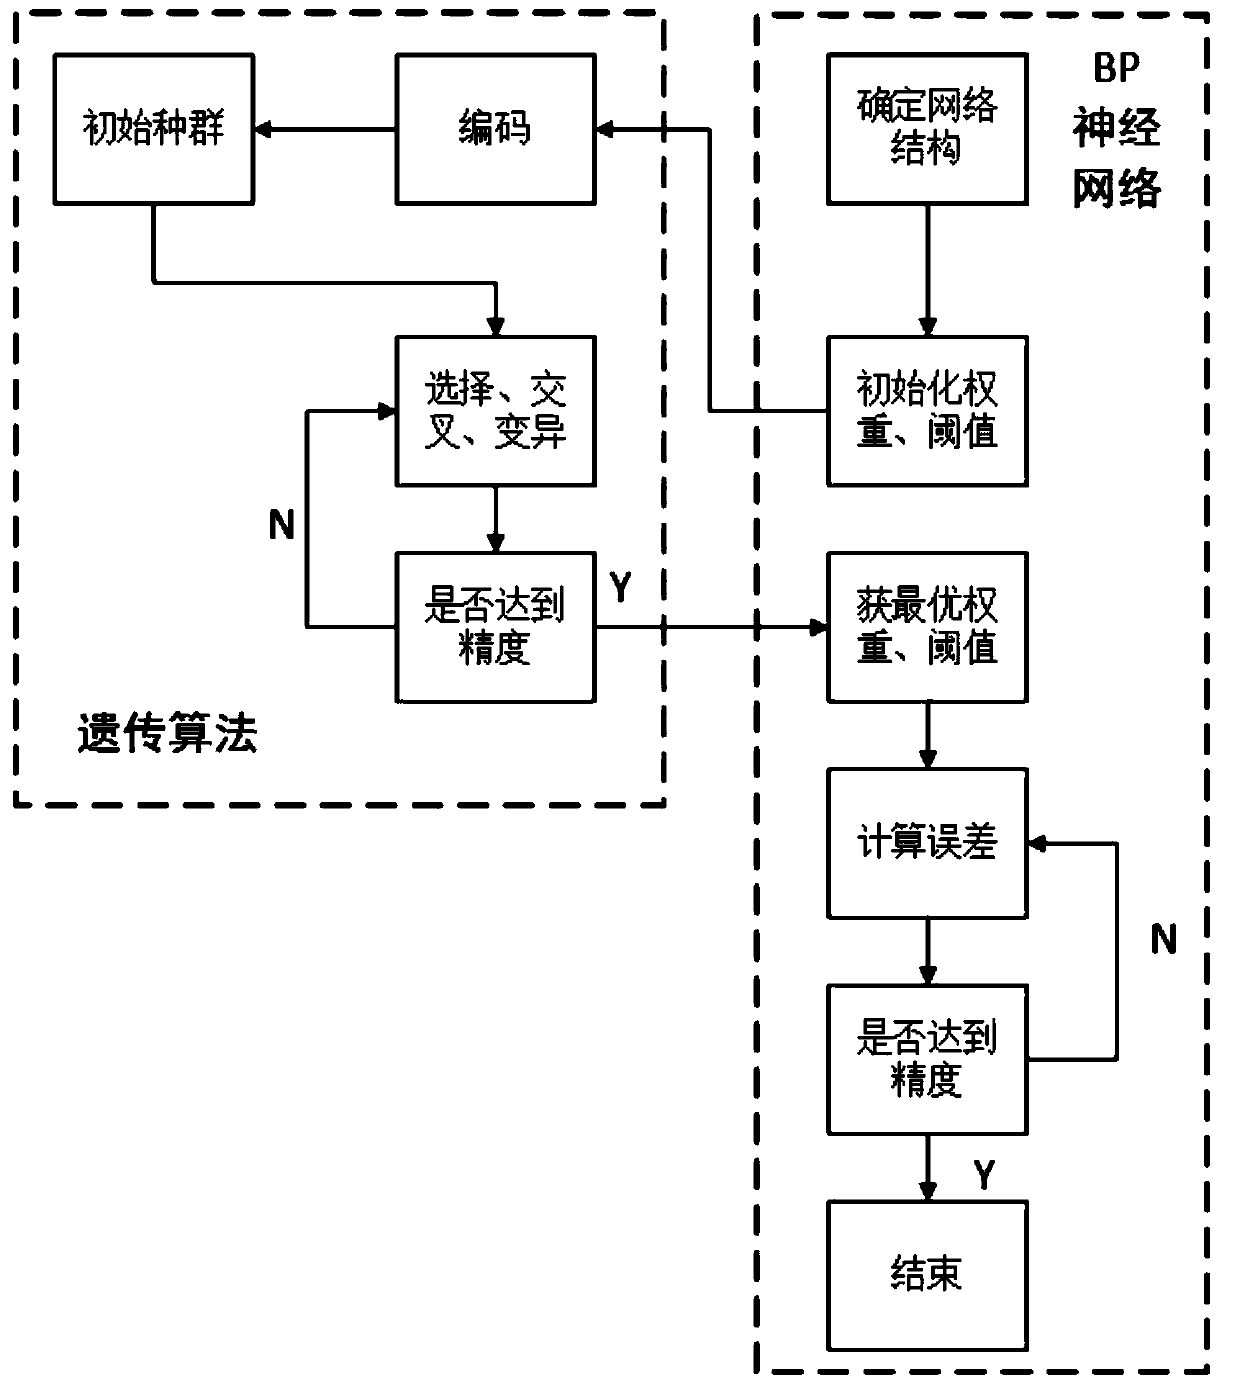 Fault diagnosis method and diagnosis system for electric valve actuating mechanism